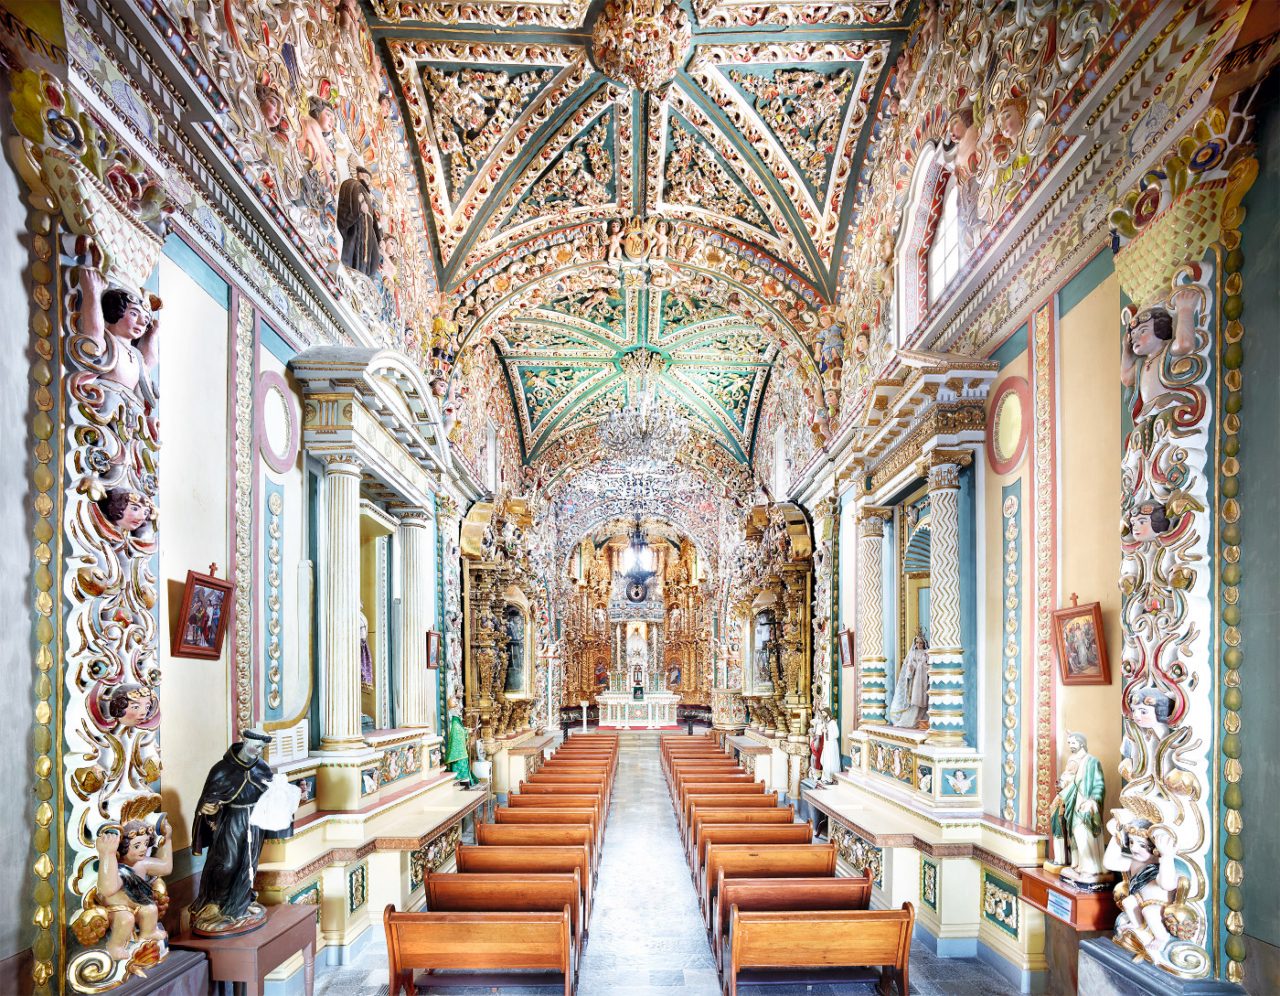 Interior of a highly decorated church